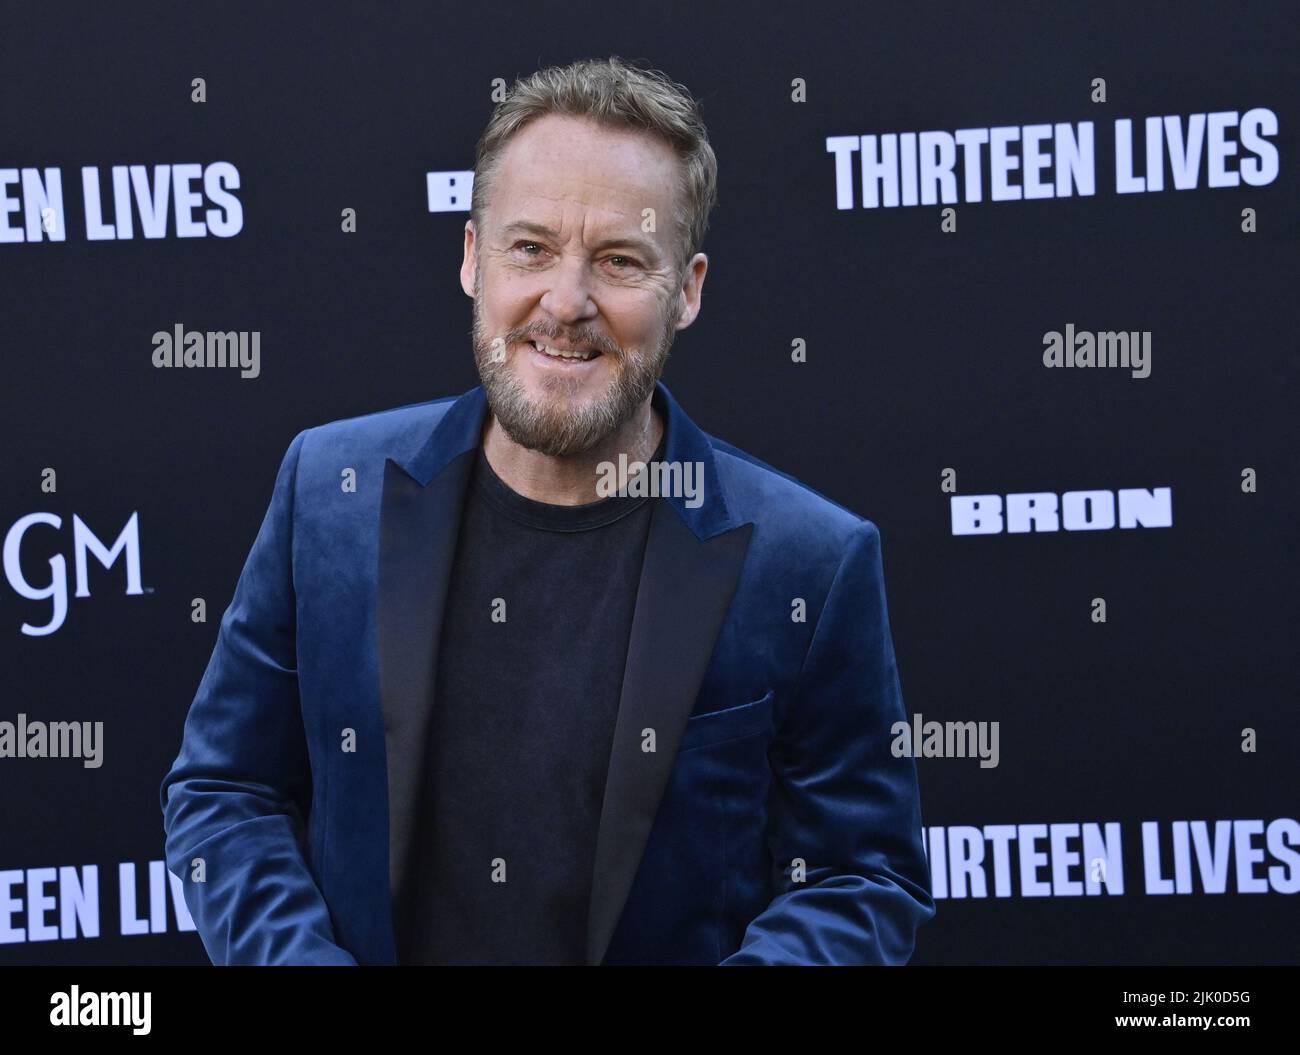 Los Angeles, United States. 29th July, 2022. Cast member Paul Gleeson  attends the premiere of Prime Video's biographical thriller 